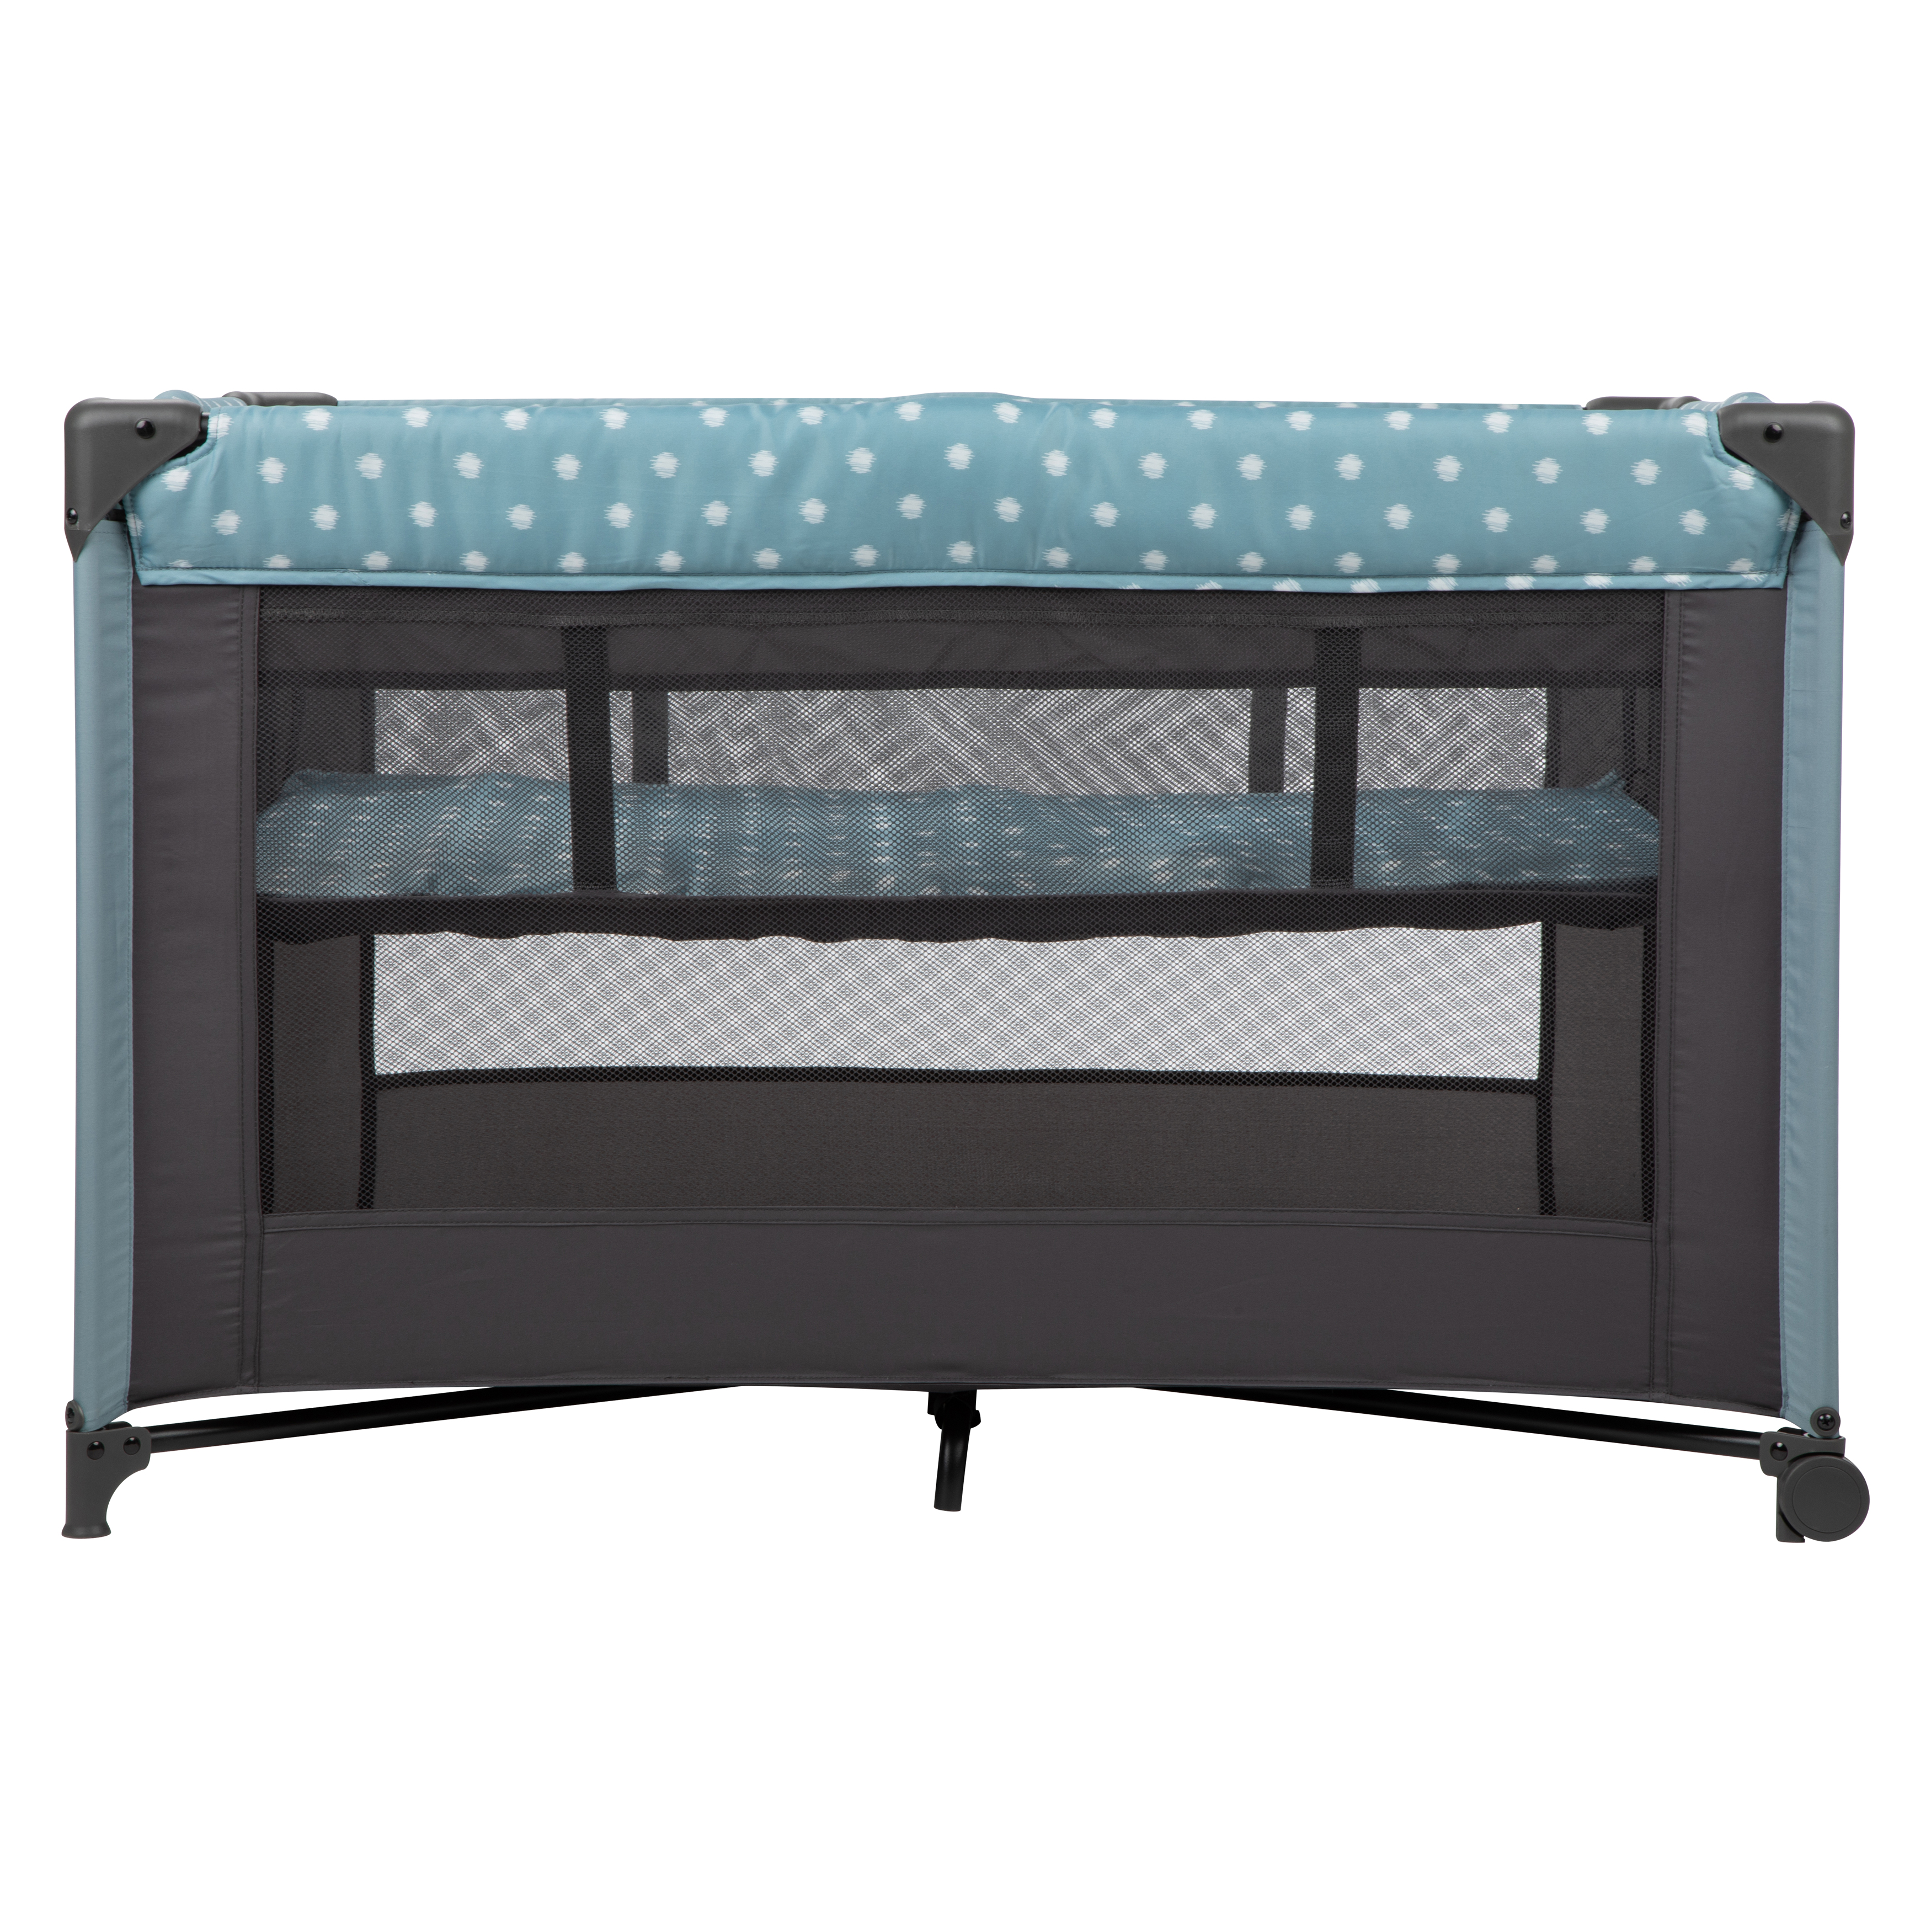 Babideal Dottie Baby Play Yard with Bassinet, Blue Dot - image 5 of 8